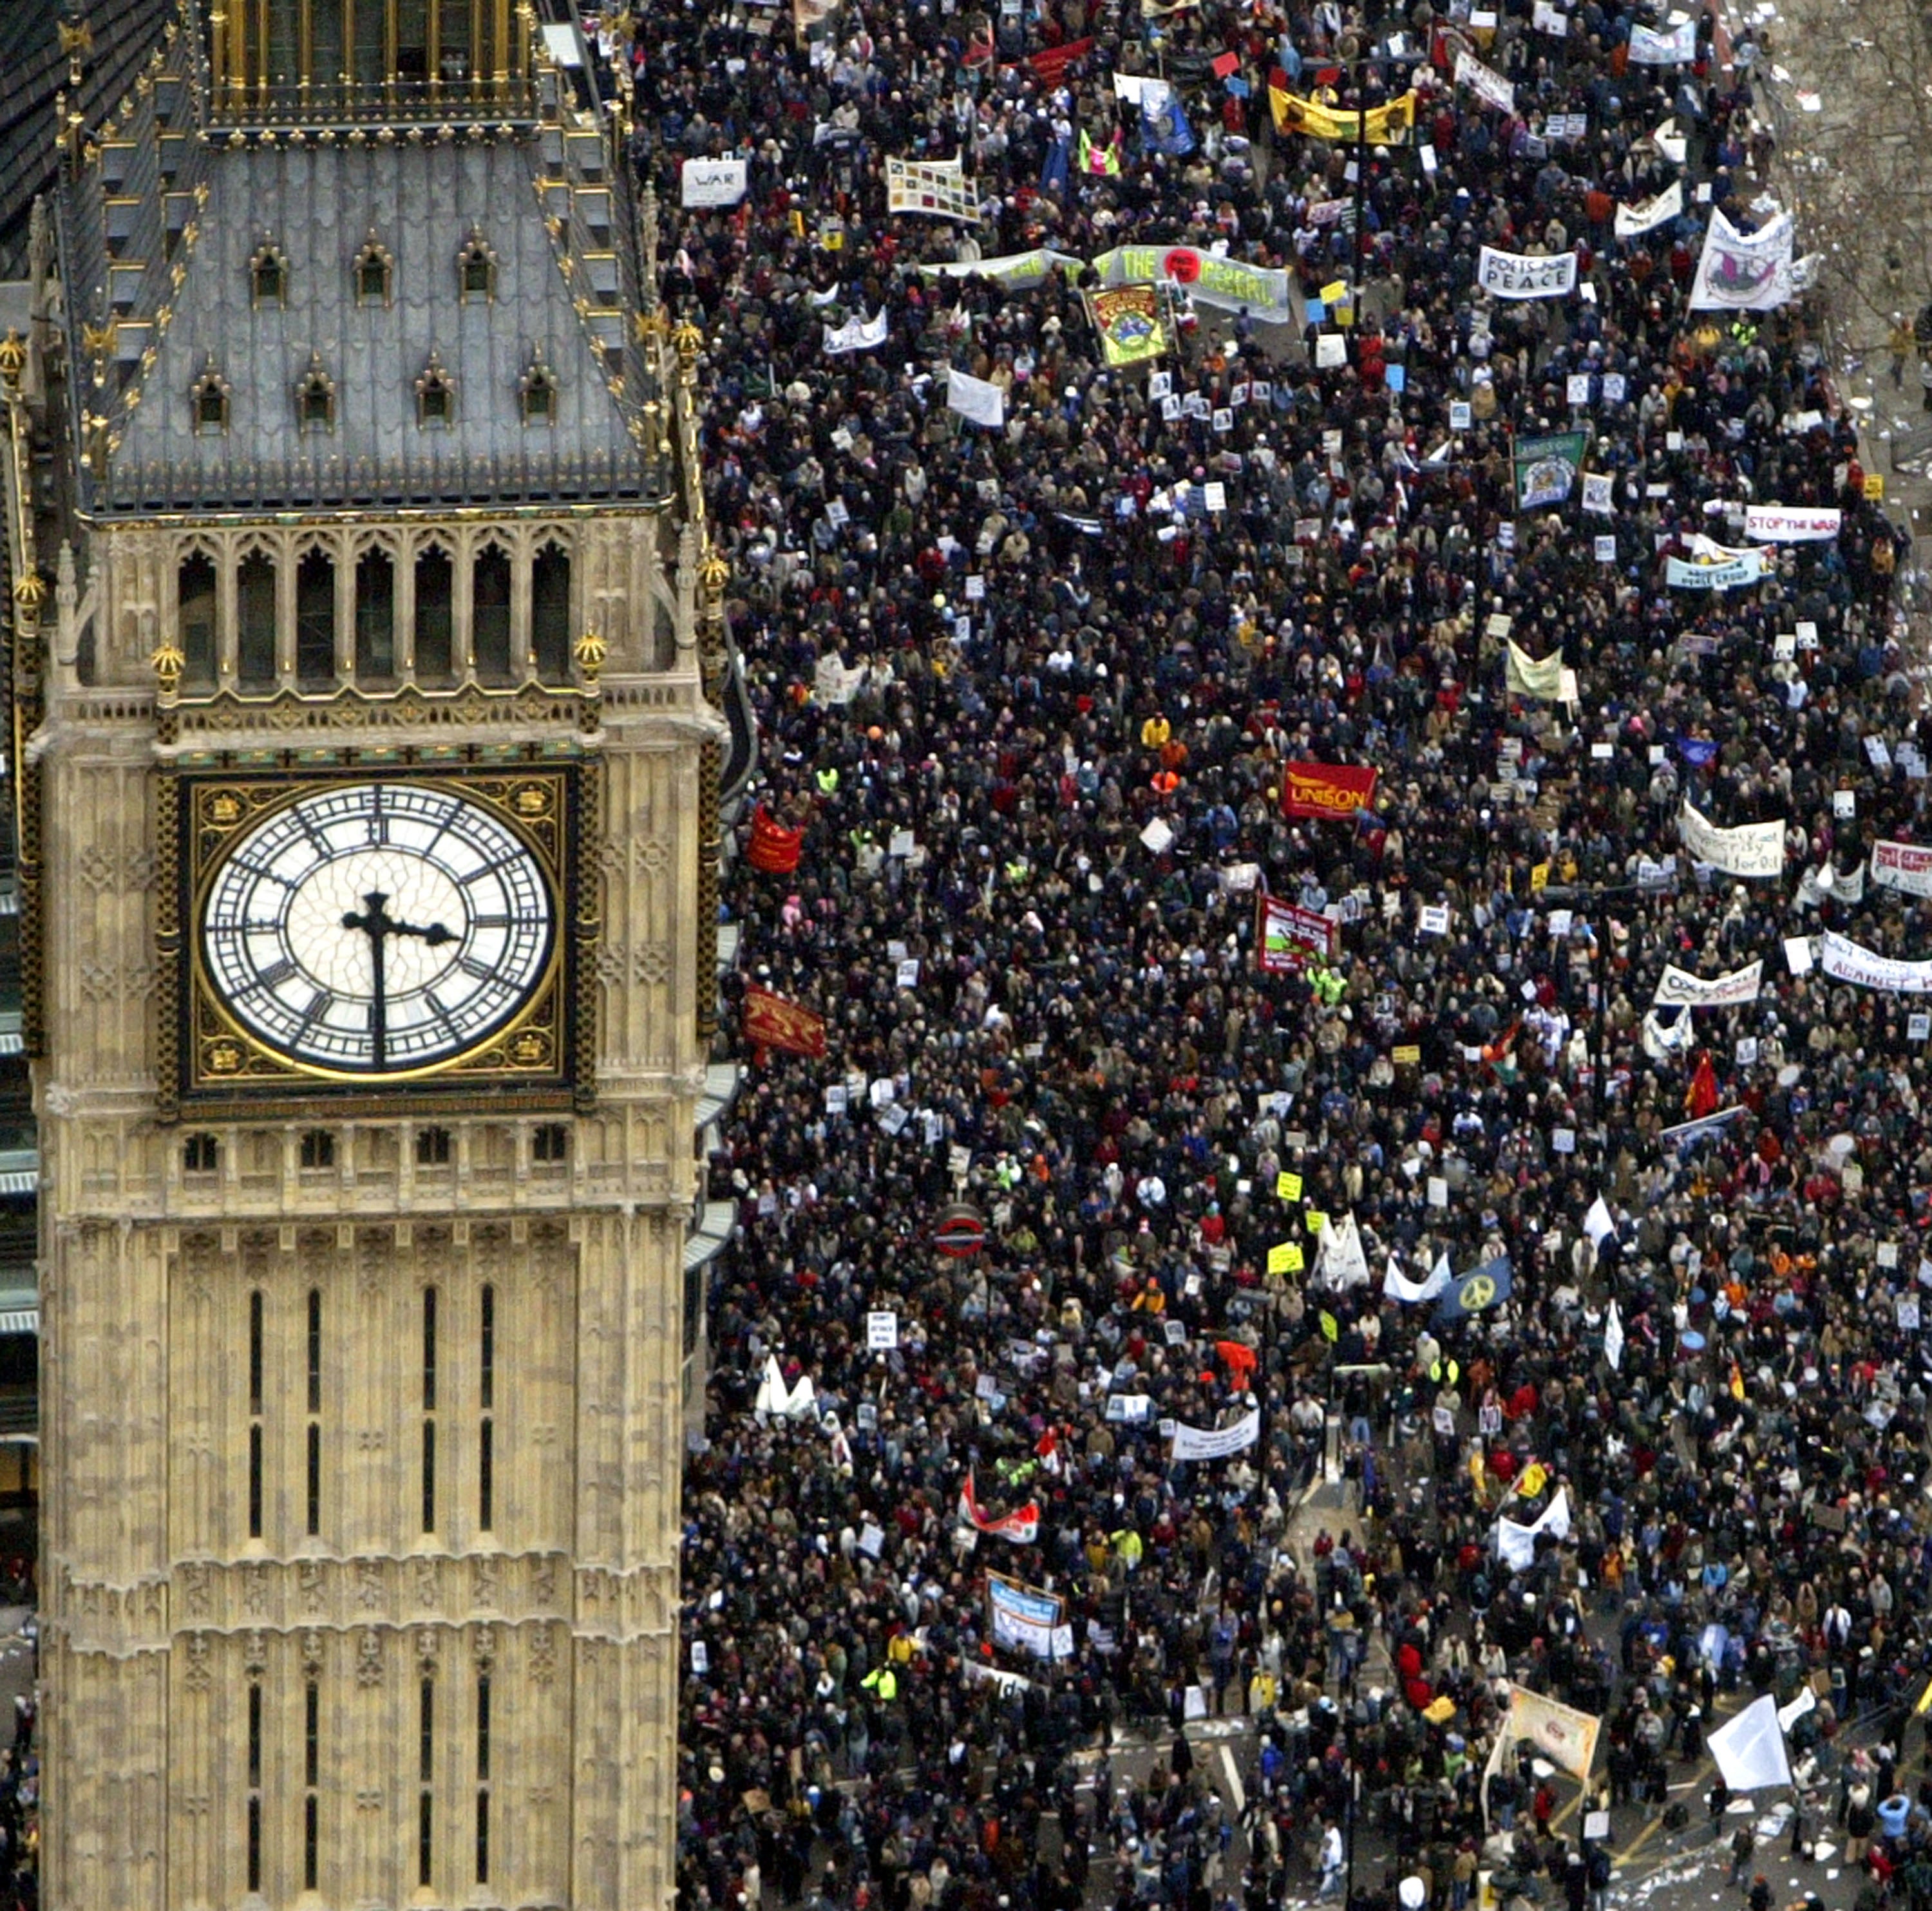 Crowds gather in the shadow of Big Ben to show their opposition